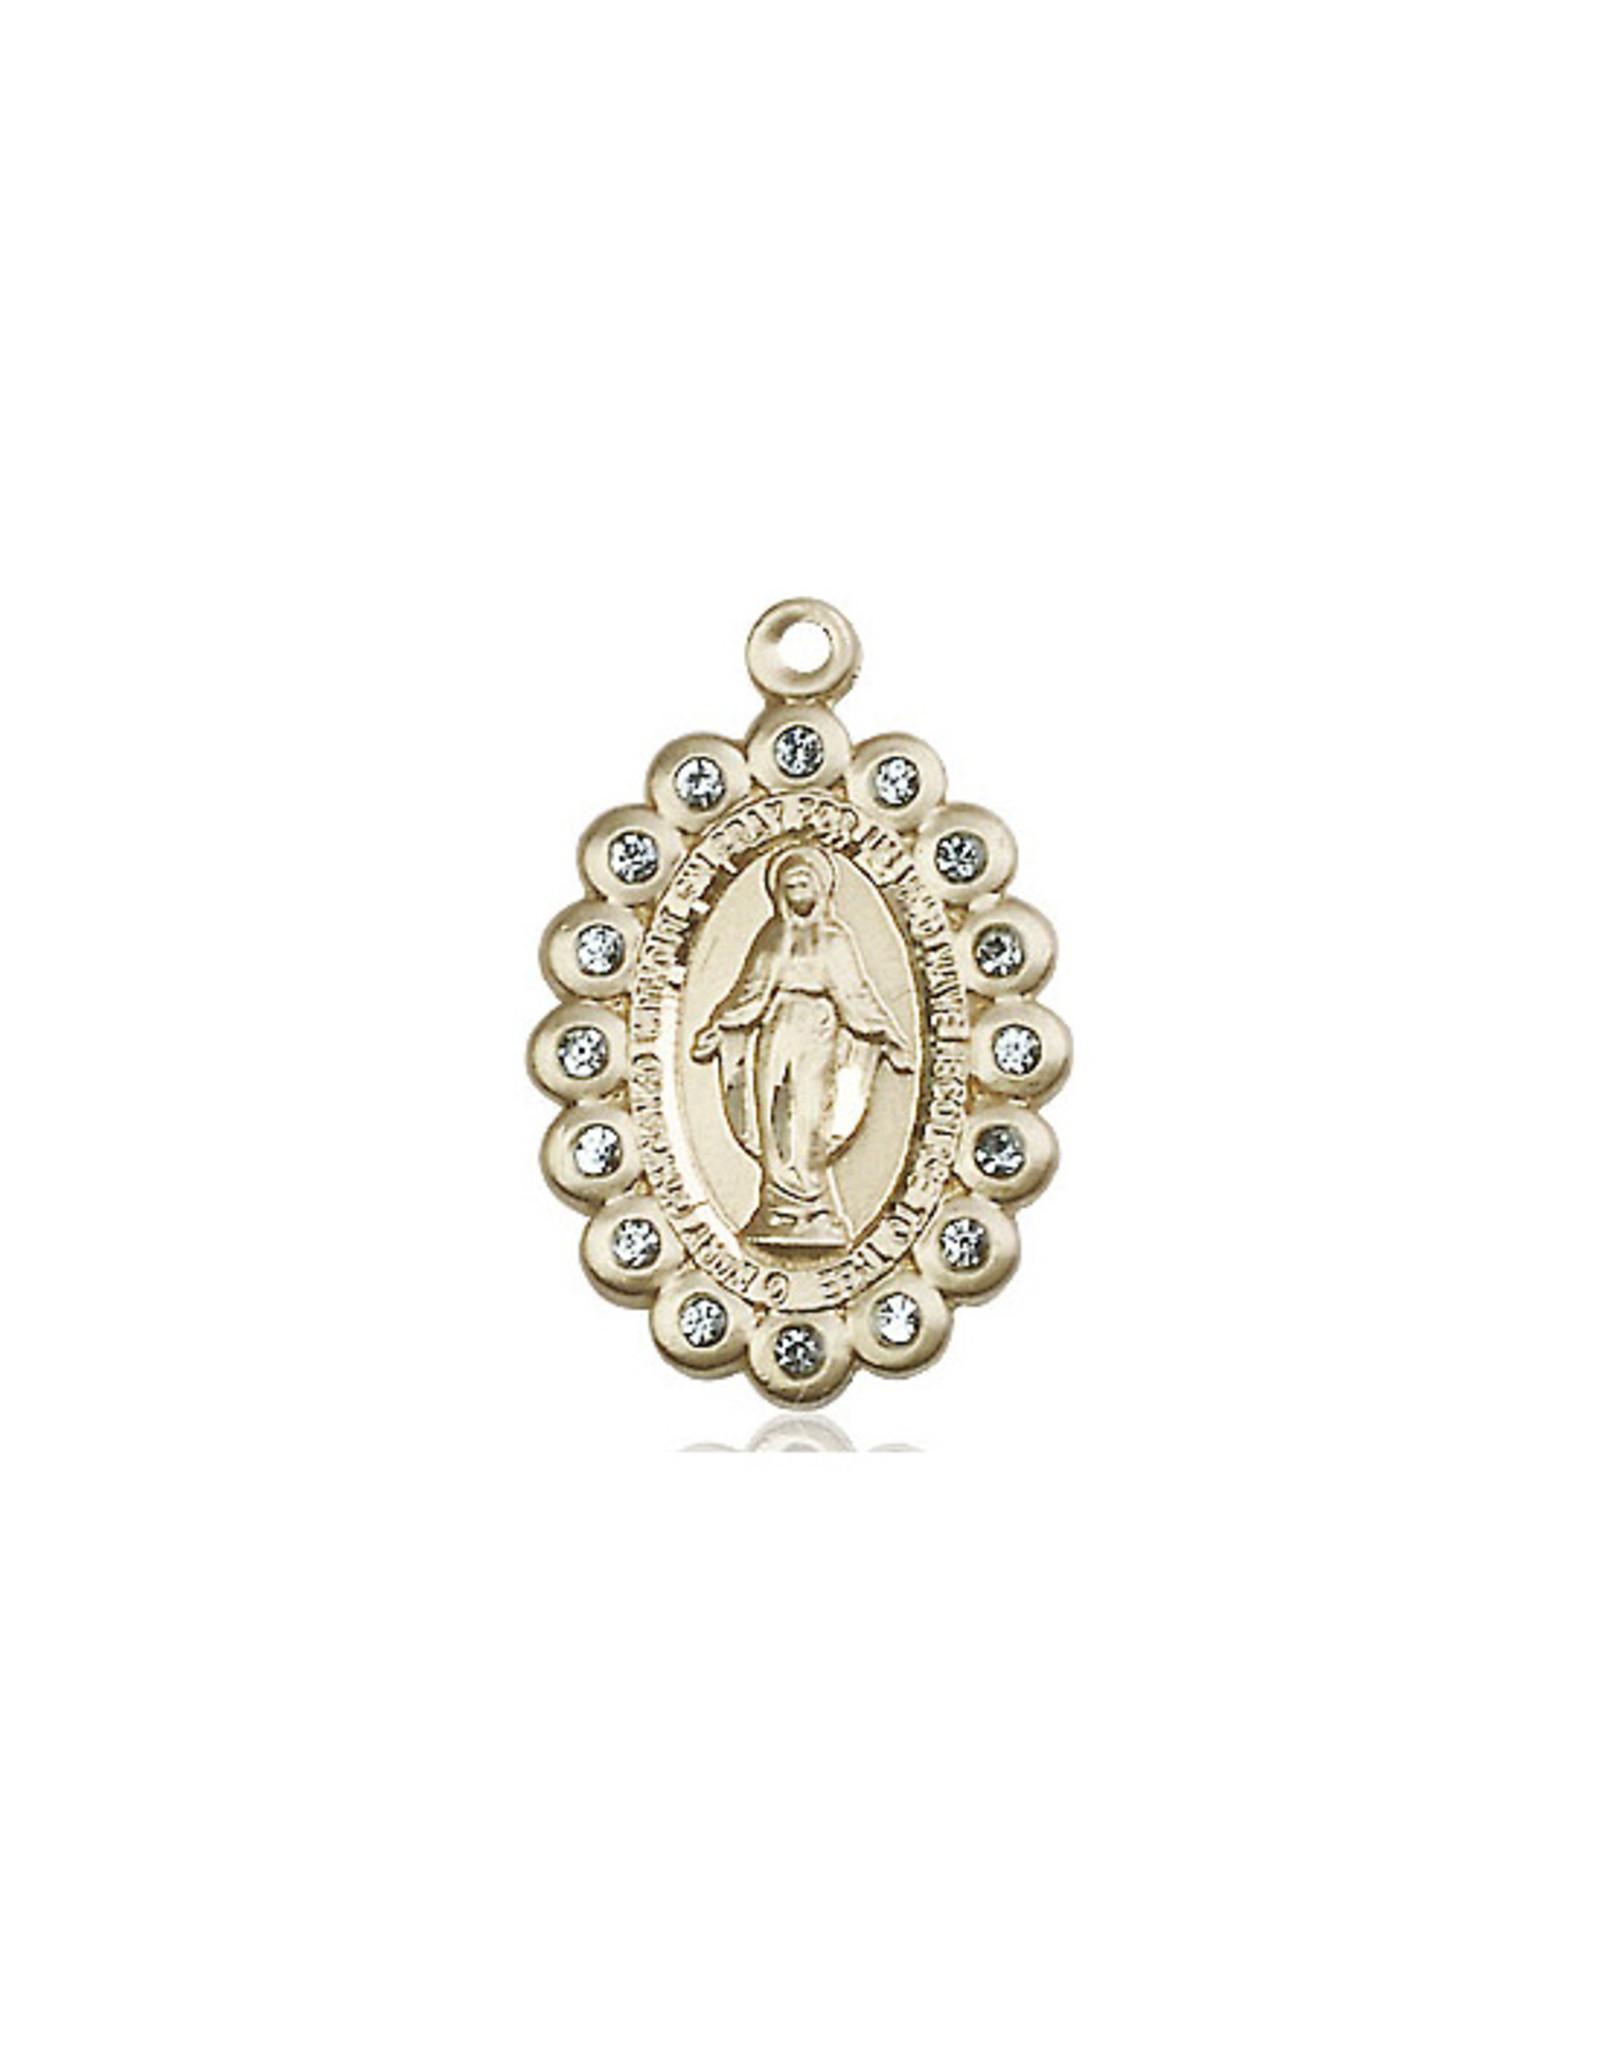 Bliss Miraculous Medal with Blue Crystals, Gold Filled